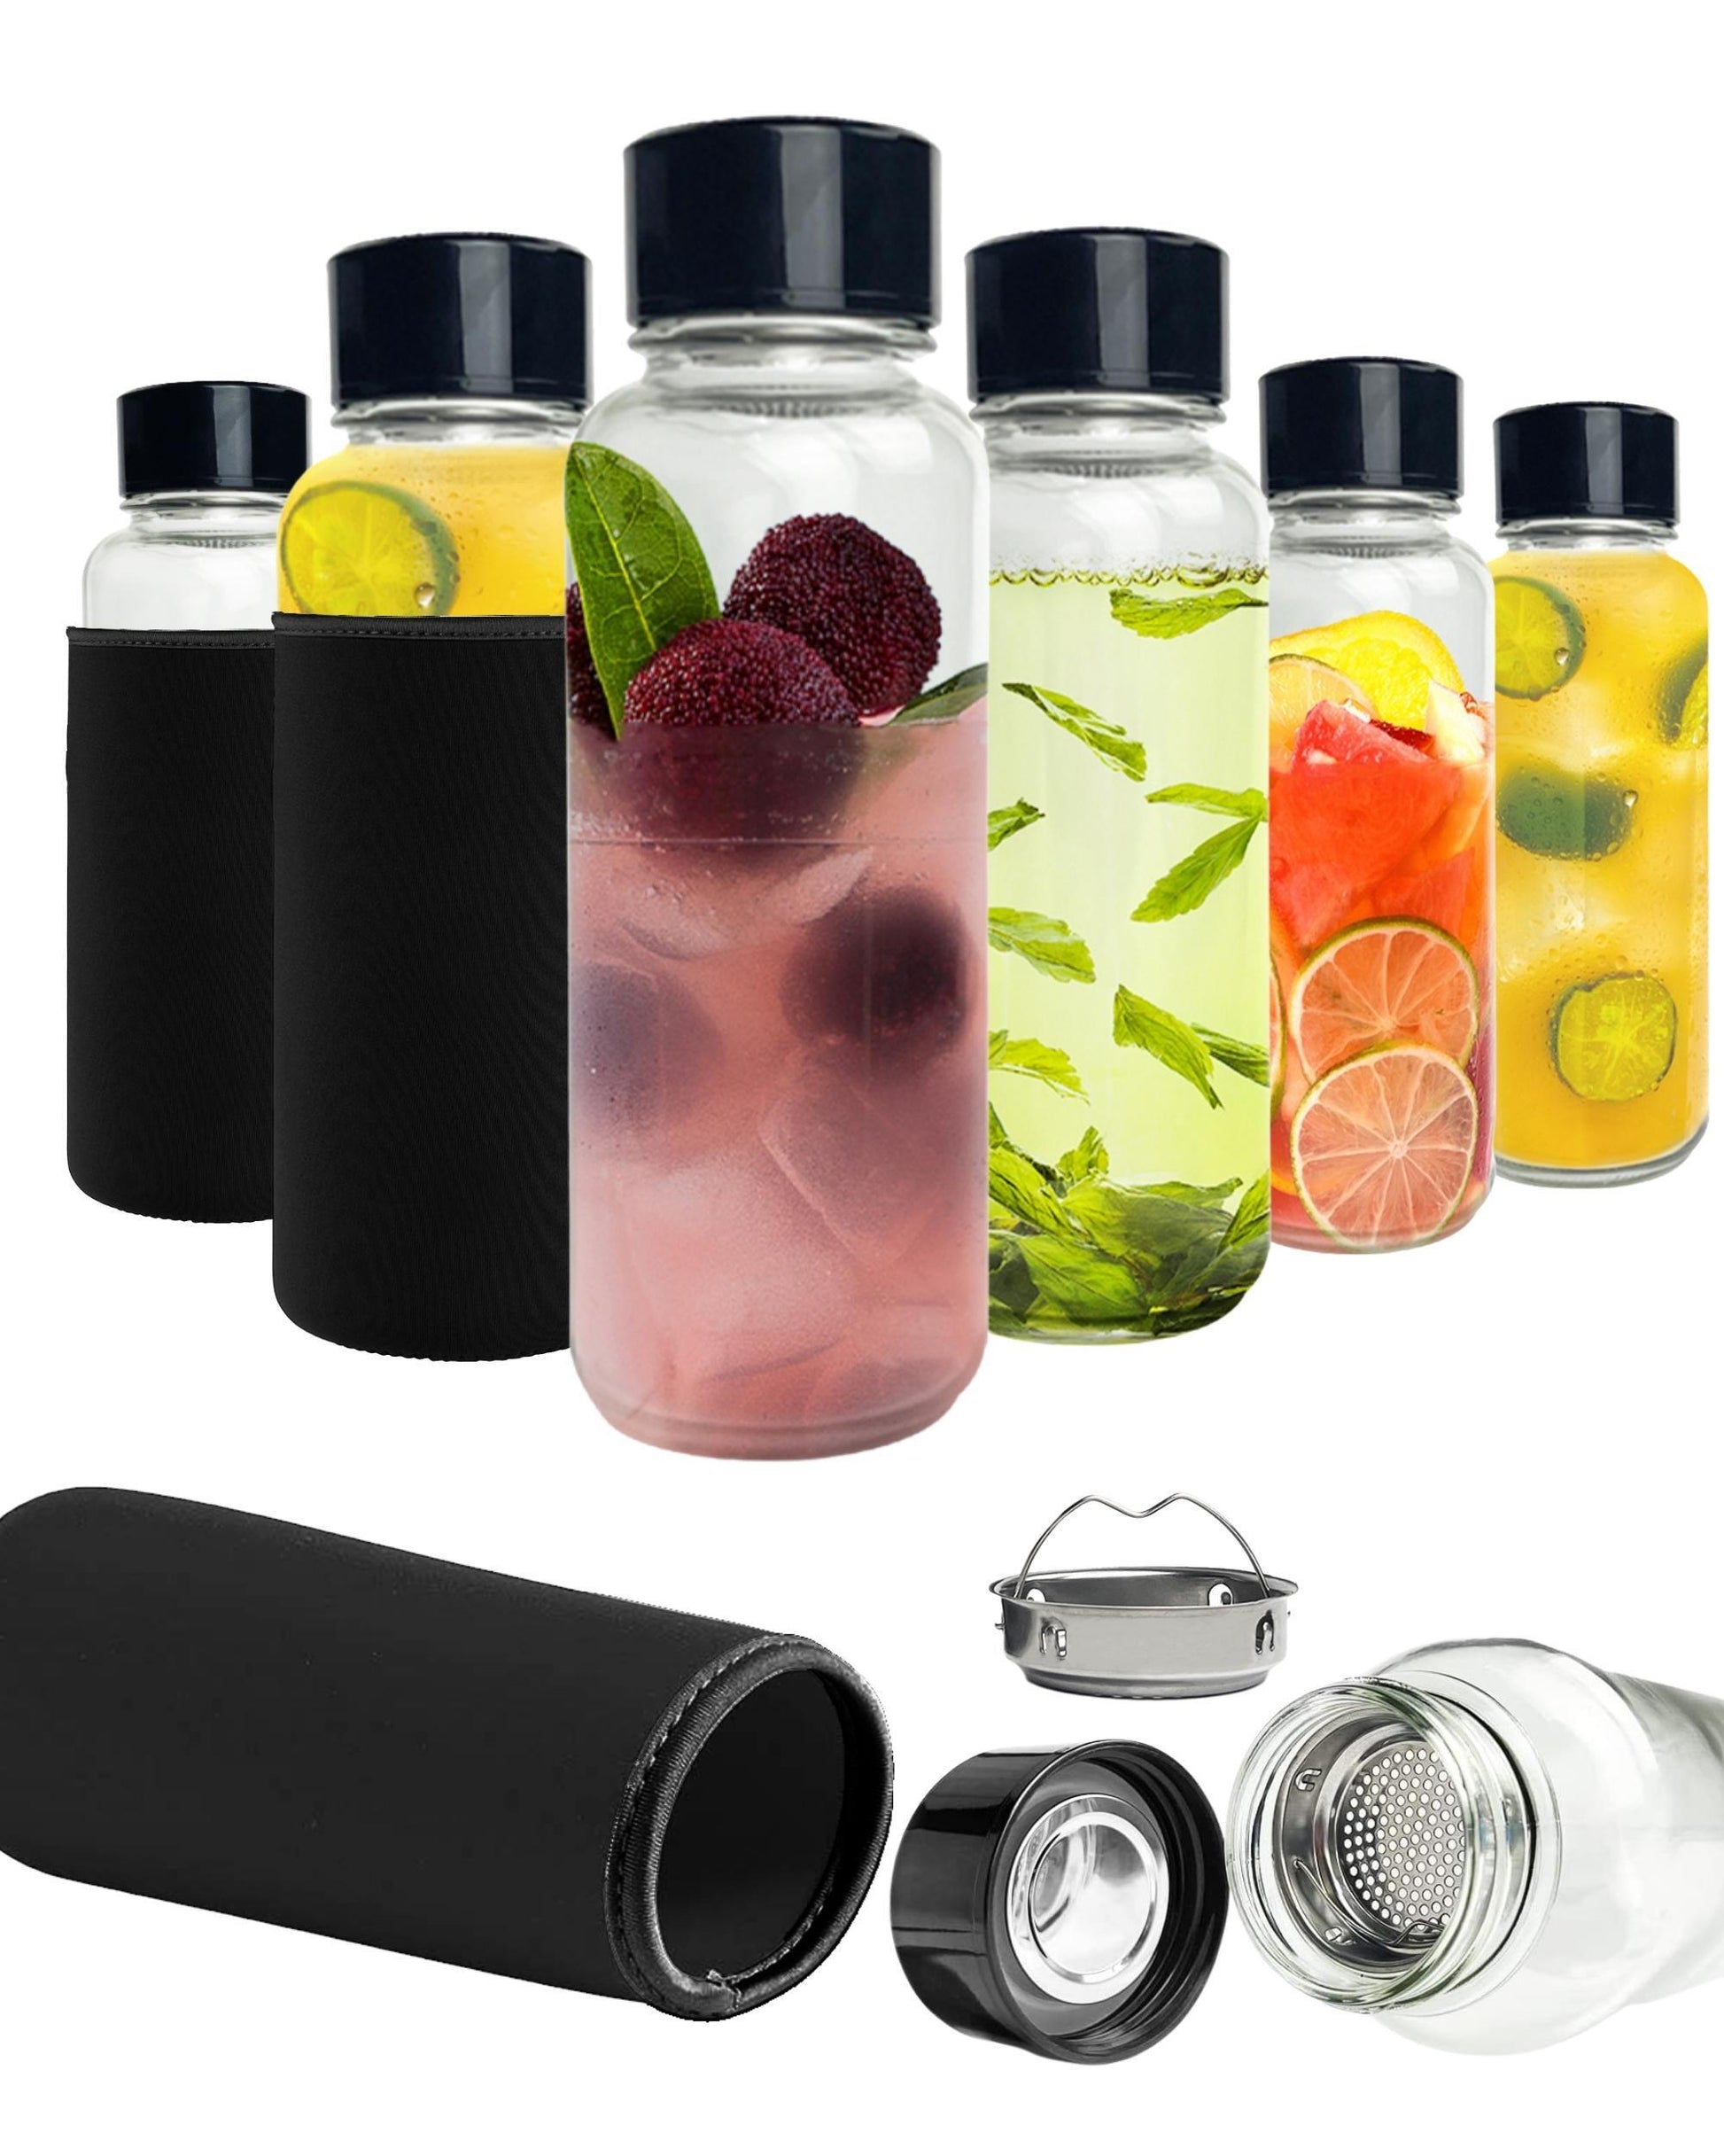 Home-it Glass Bottles 6 Pack 16oz - Water Bottle Glass with